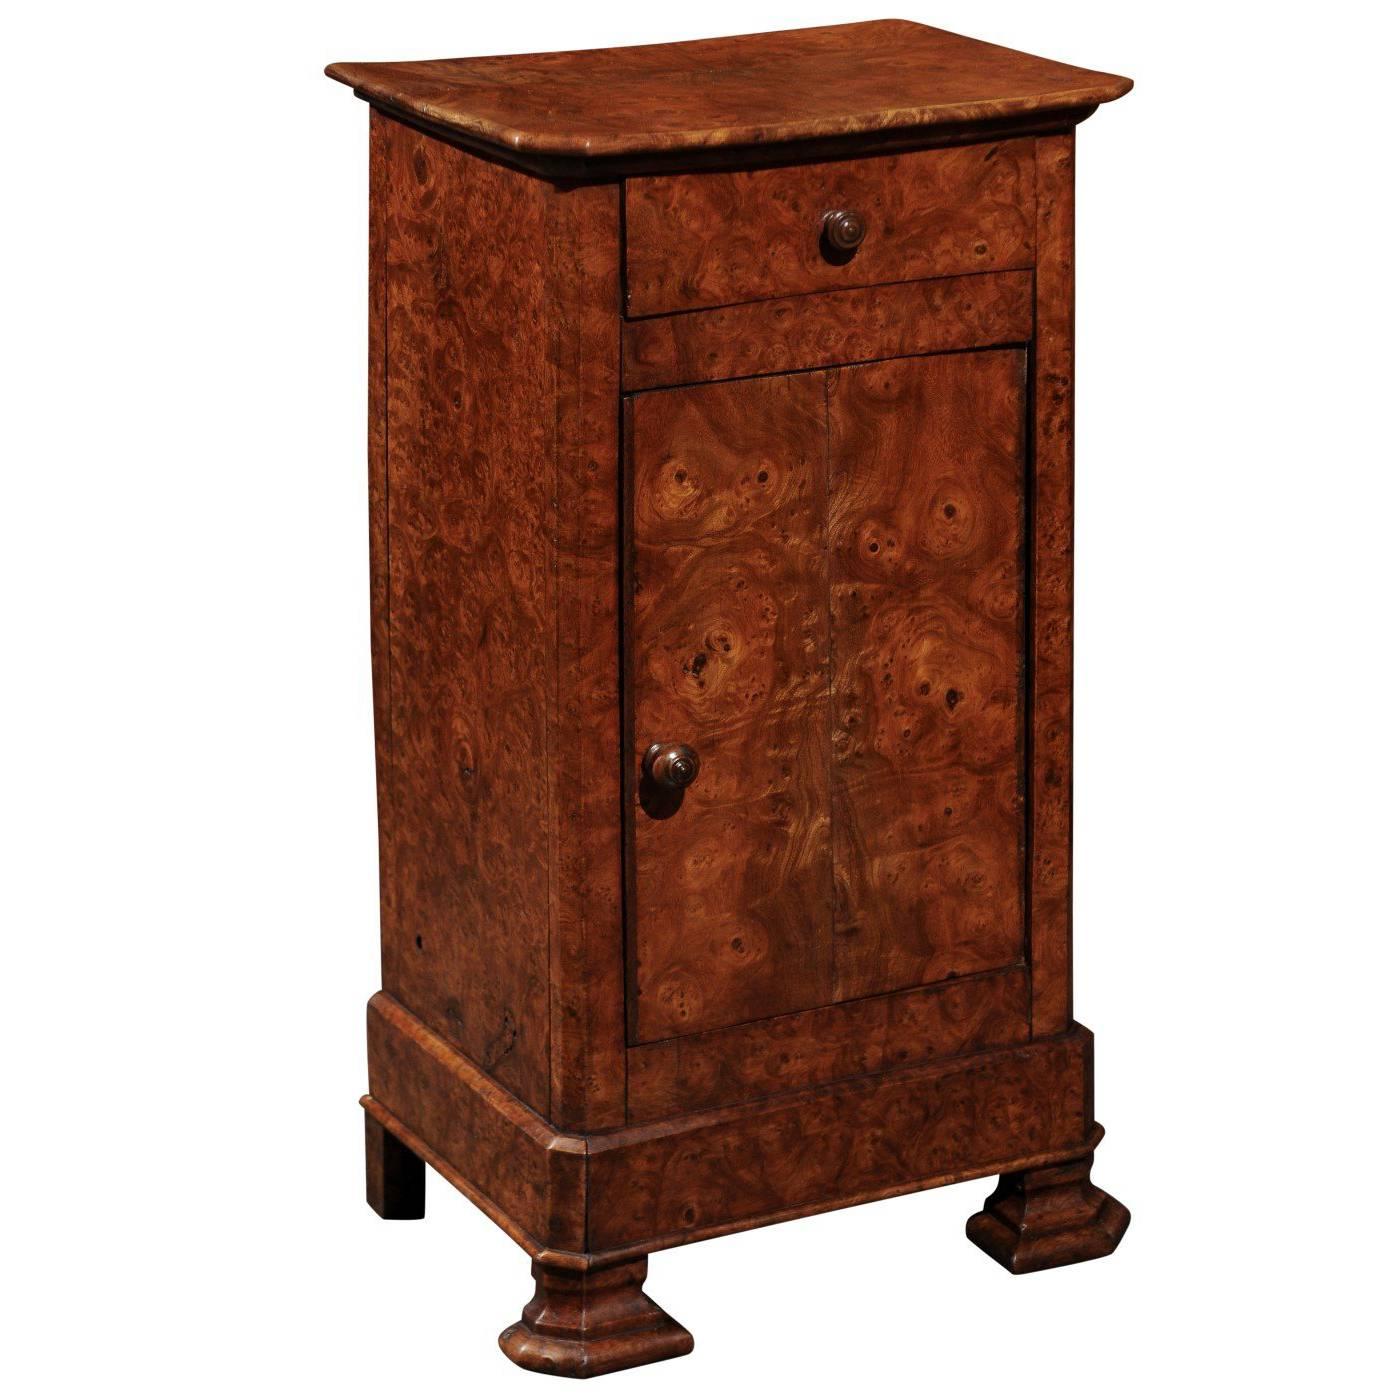 English Burl Wood Pot Cupboard from the 1880s with Single Drawer and Door